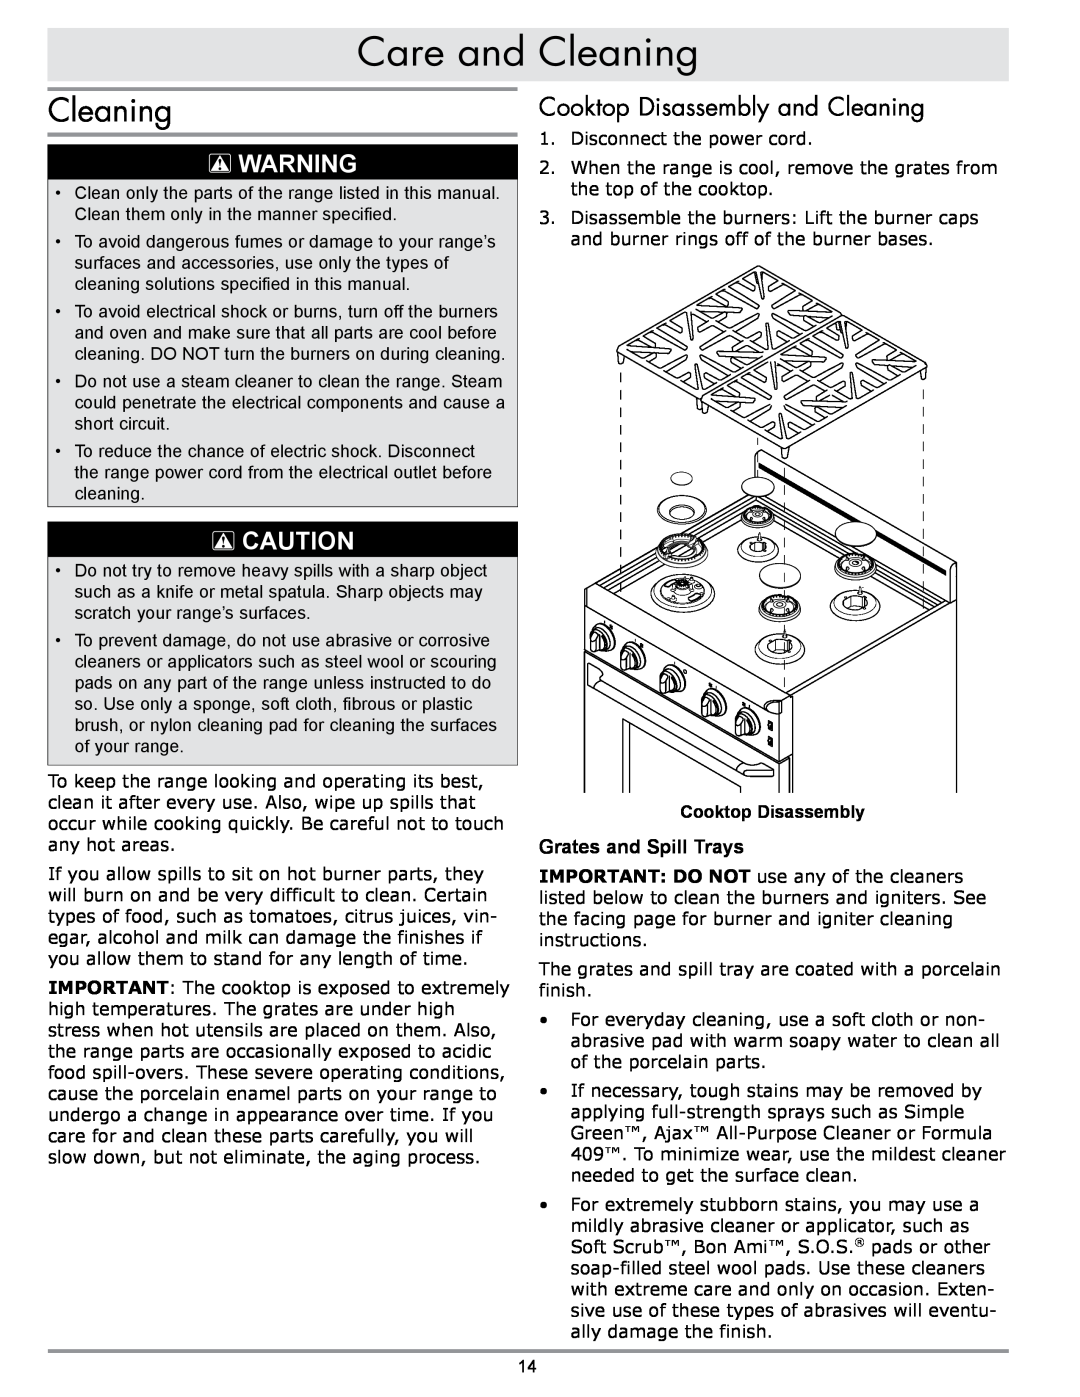 Sears ER30GI manual Care and Cleaning, Cooktop Disassembly and Cleaning, Grates and Spill Trays 